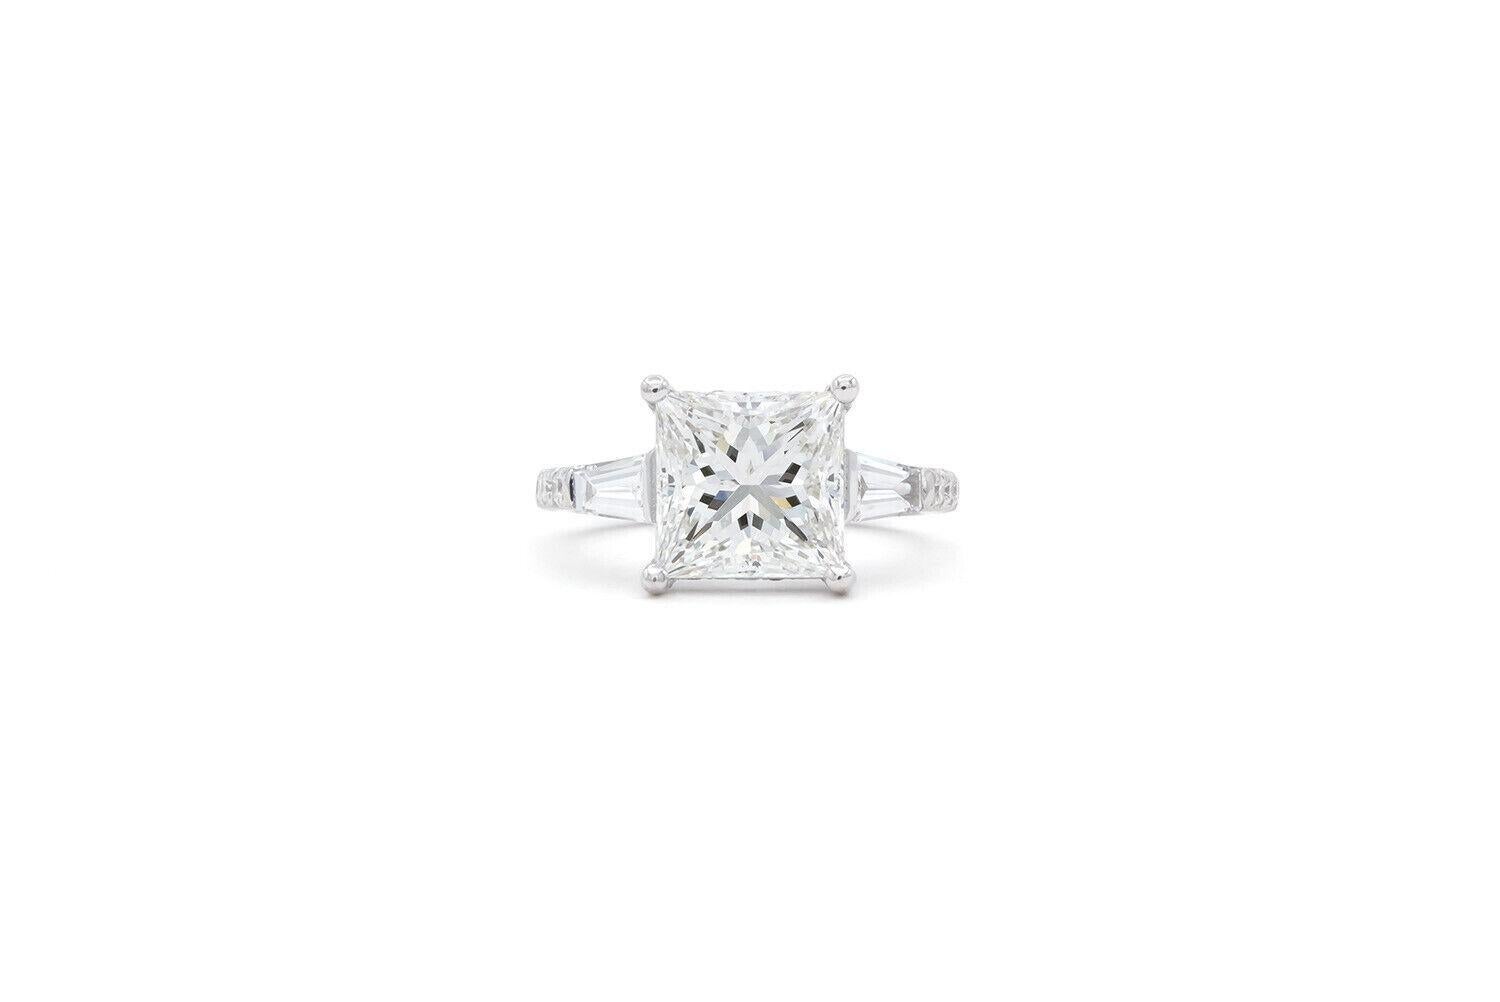 We are pleased to offer this GIA Certified Princess Cut Diamond & 14k White Gold Engagement Ring. This beautiful ring features a GIA certified & laser inscribed 3.05ct F/IF (internally flawless) princess cut diamond accented by and estimated 0.70ctw